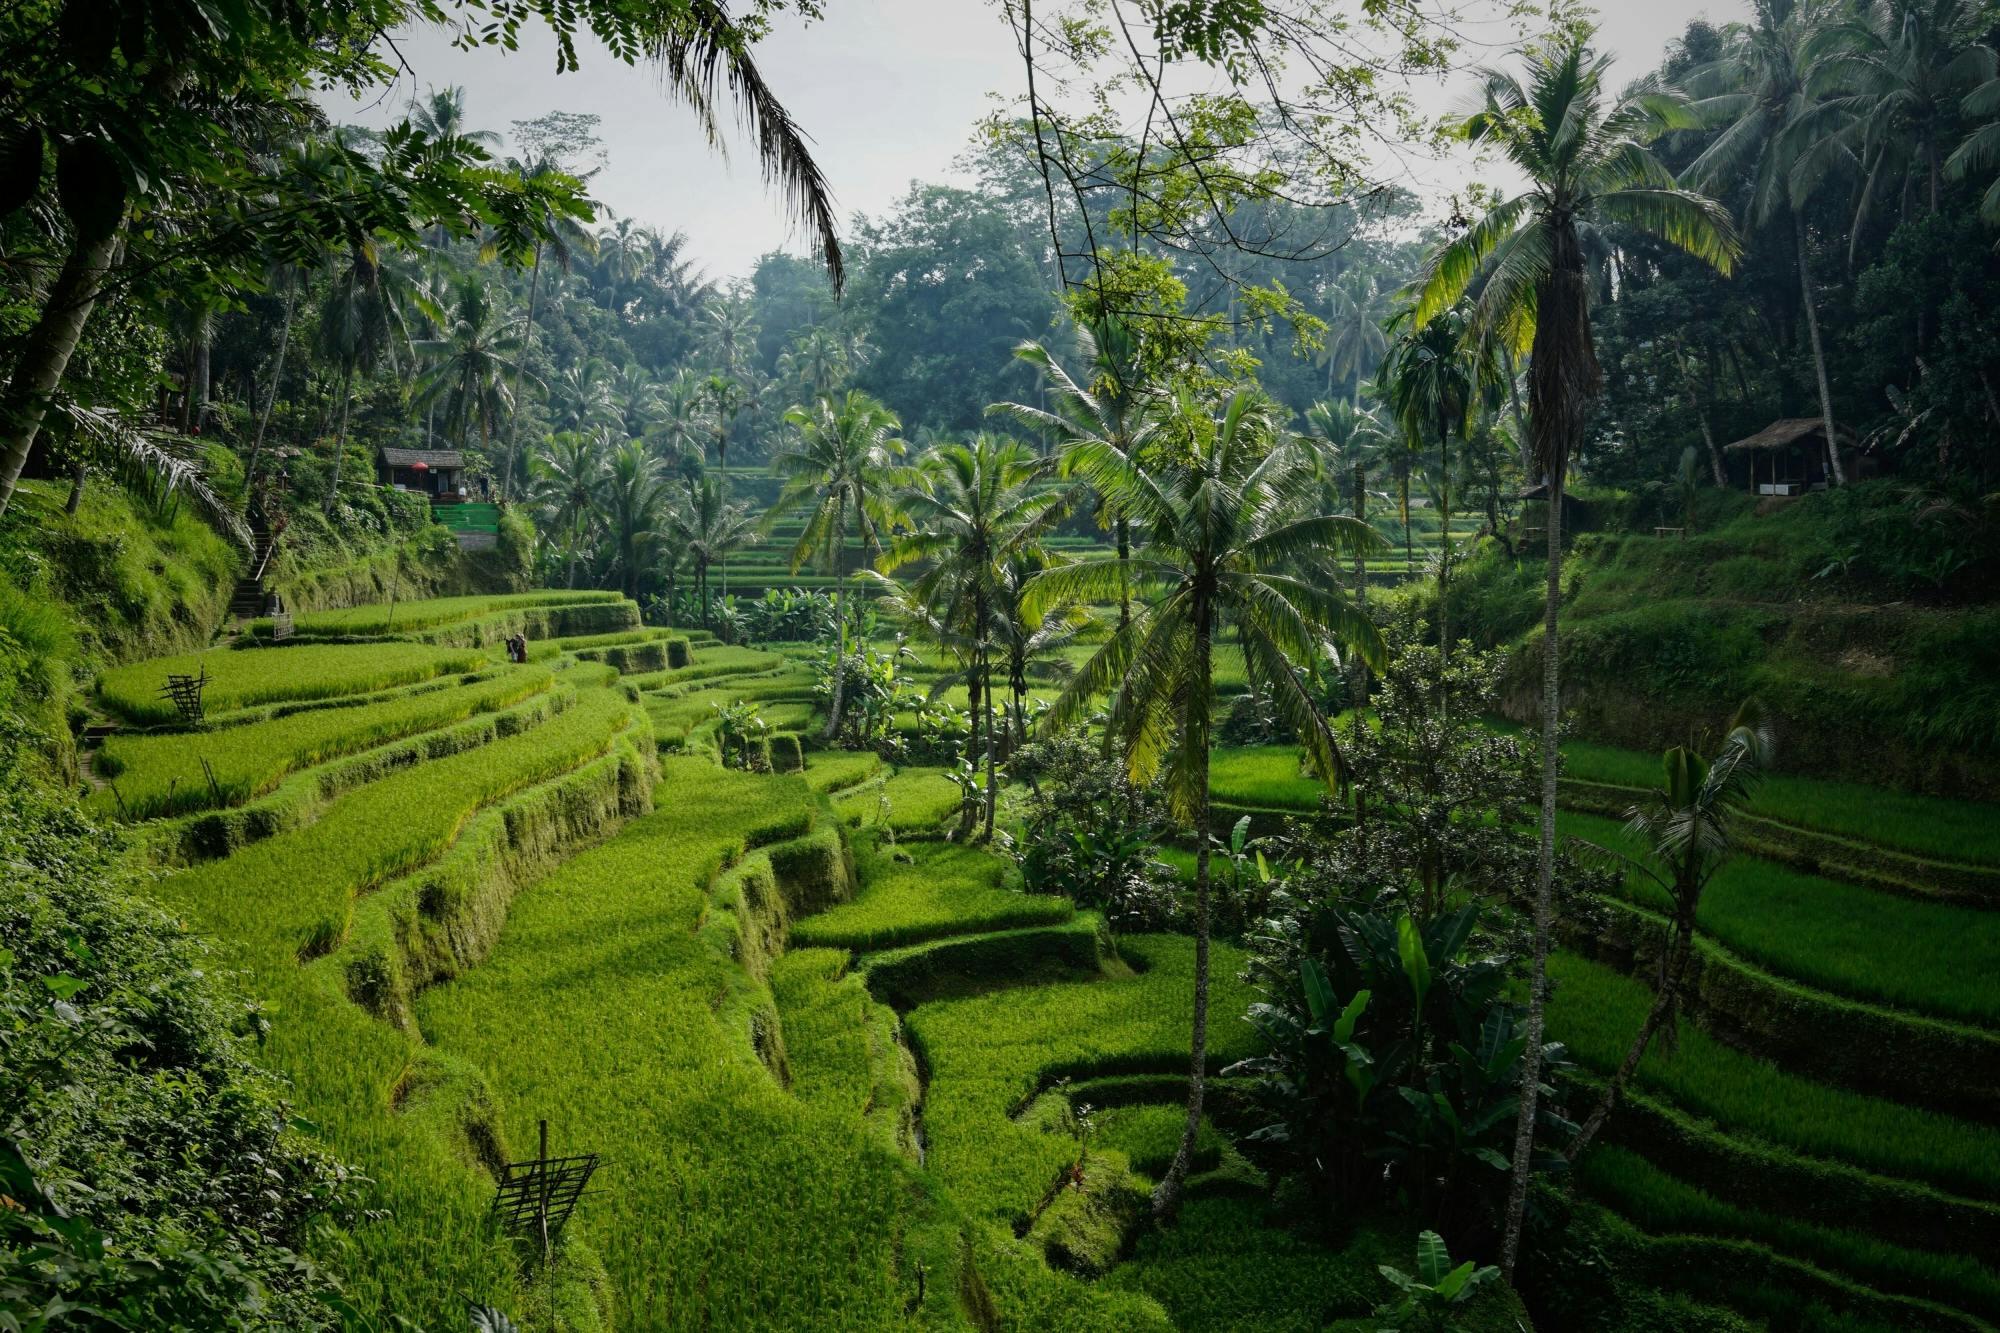 Ancients Relics of Ubud From Semarang Private Tour